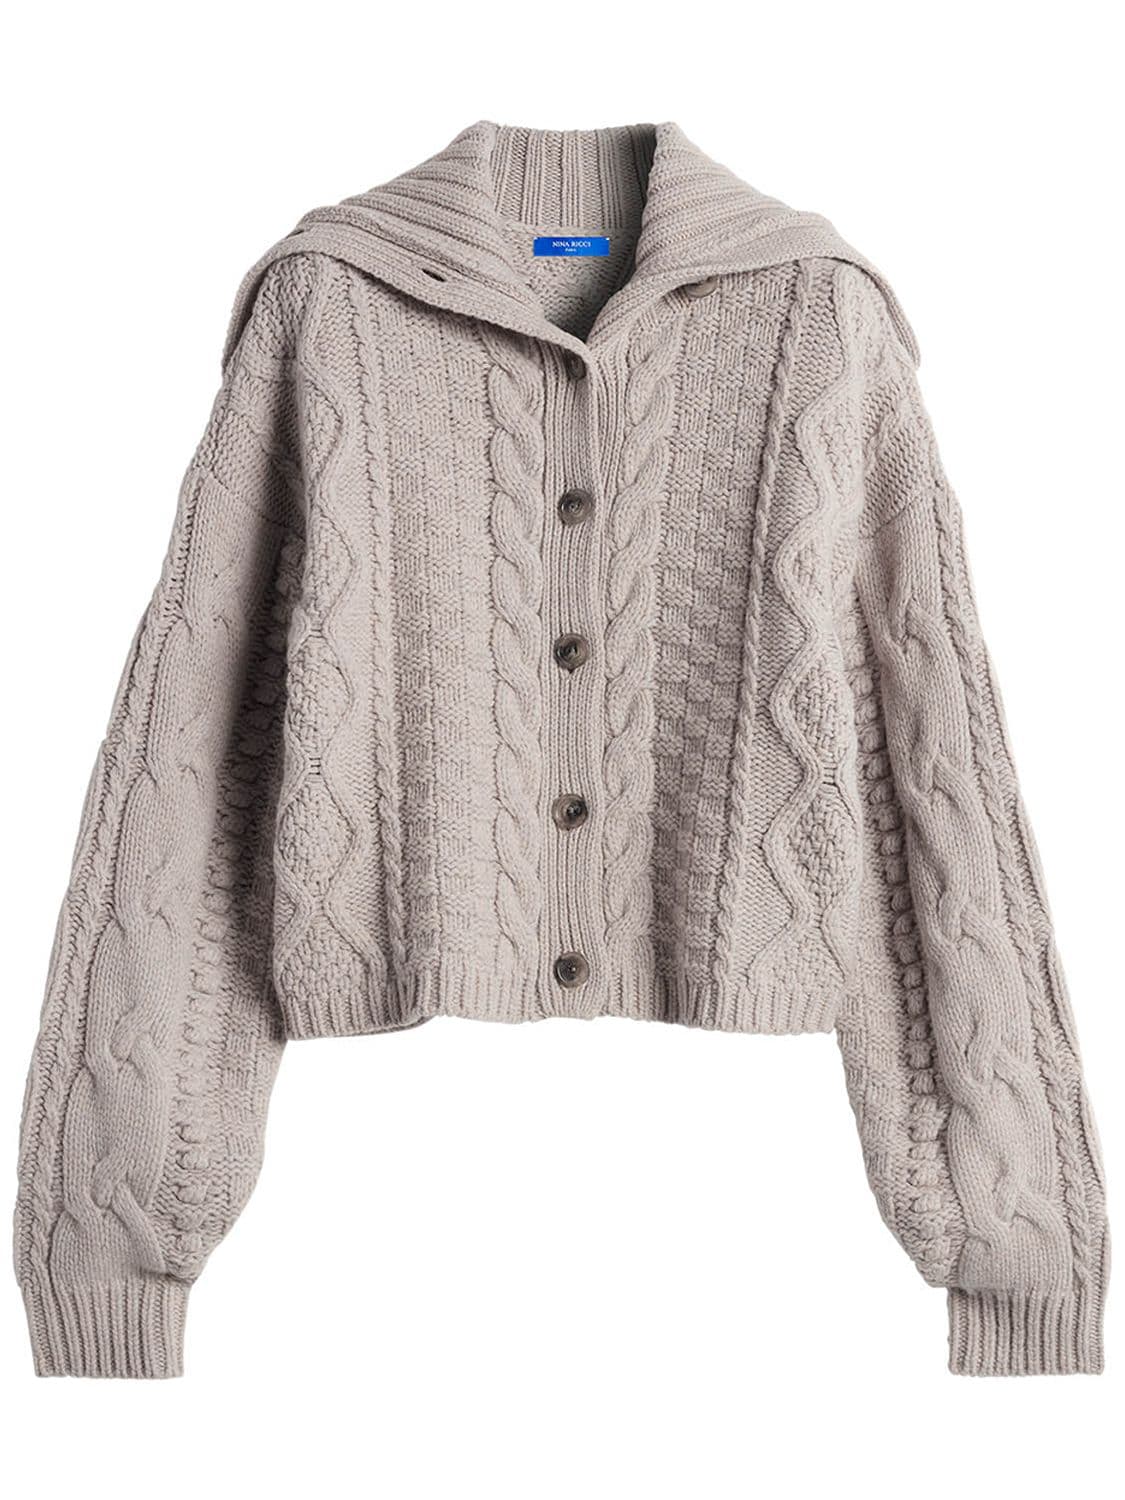 Wool Knit Cable Crop Cardigan